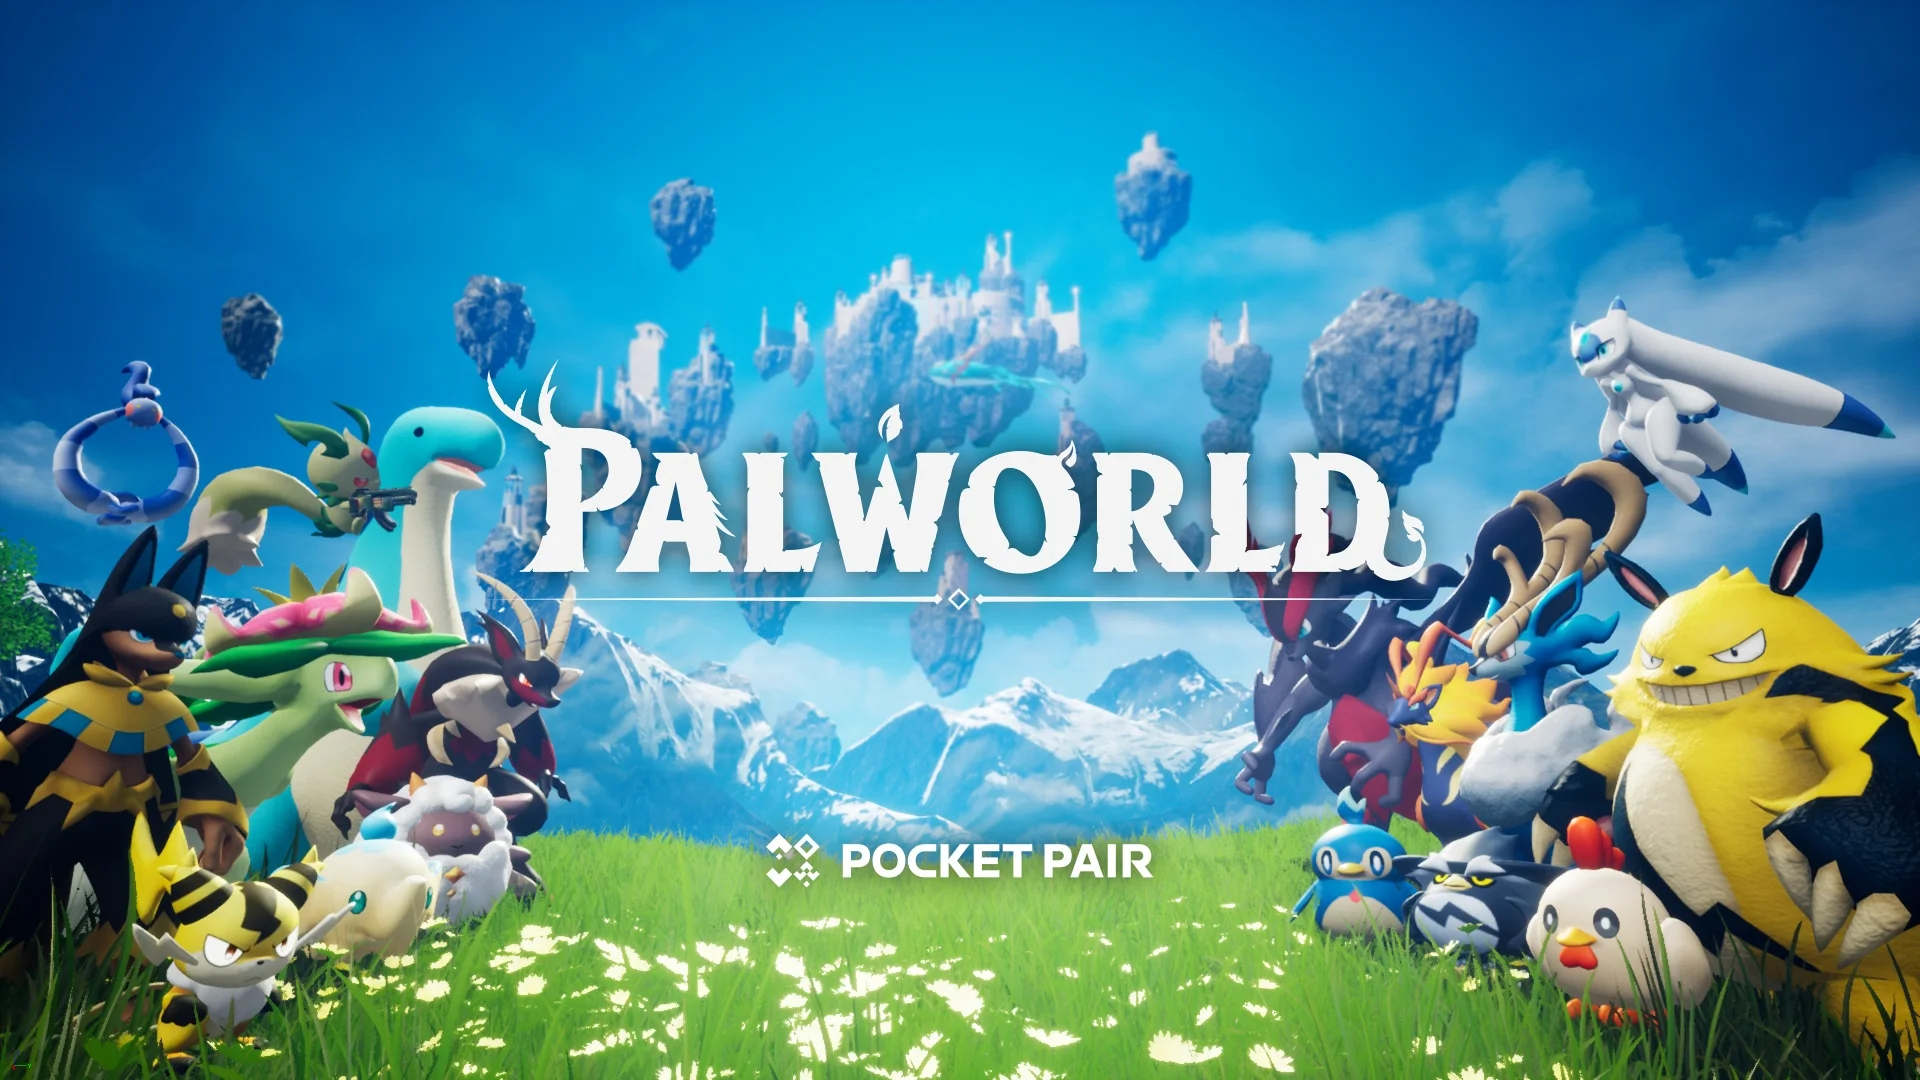 Is Palworld coming for Mobile?